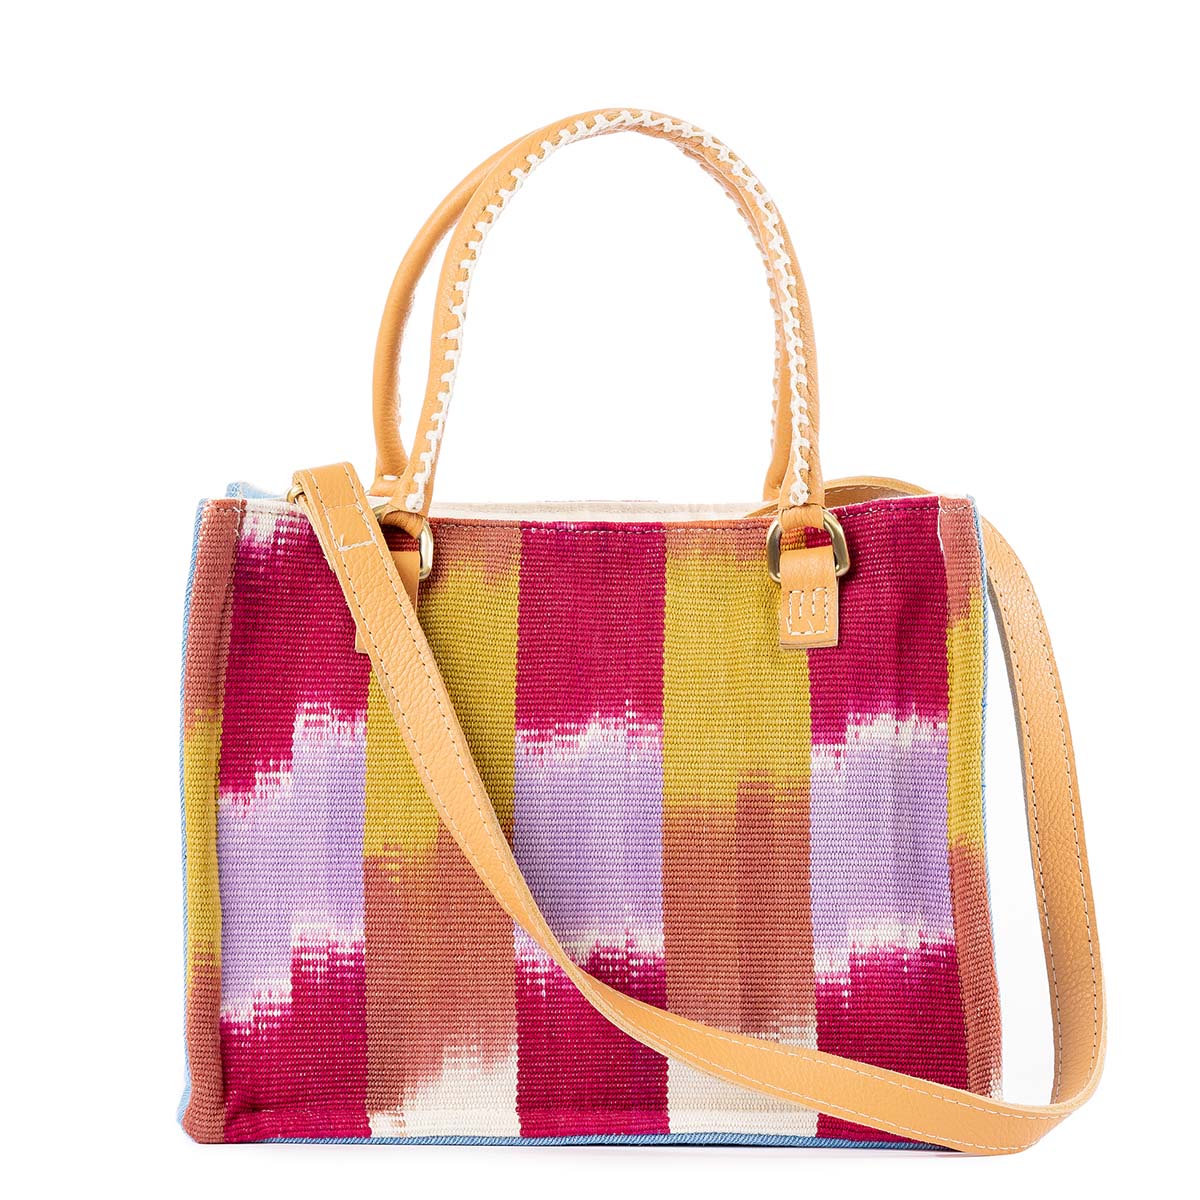 The front of the hand woven artisan Mini Irma Tote in Raspberry Paleta. It has a watercolor red, orange, yellow, purple, and white stripes. It has leather handles with white embroidery and a detachable leather strap.